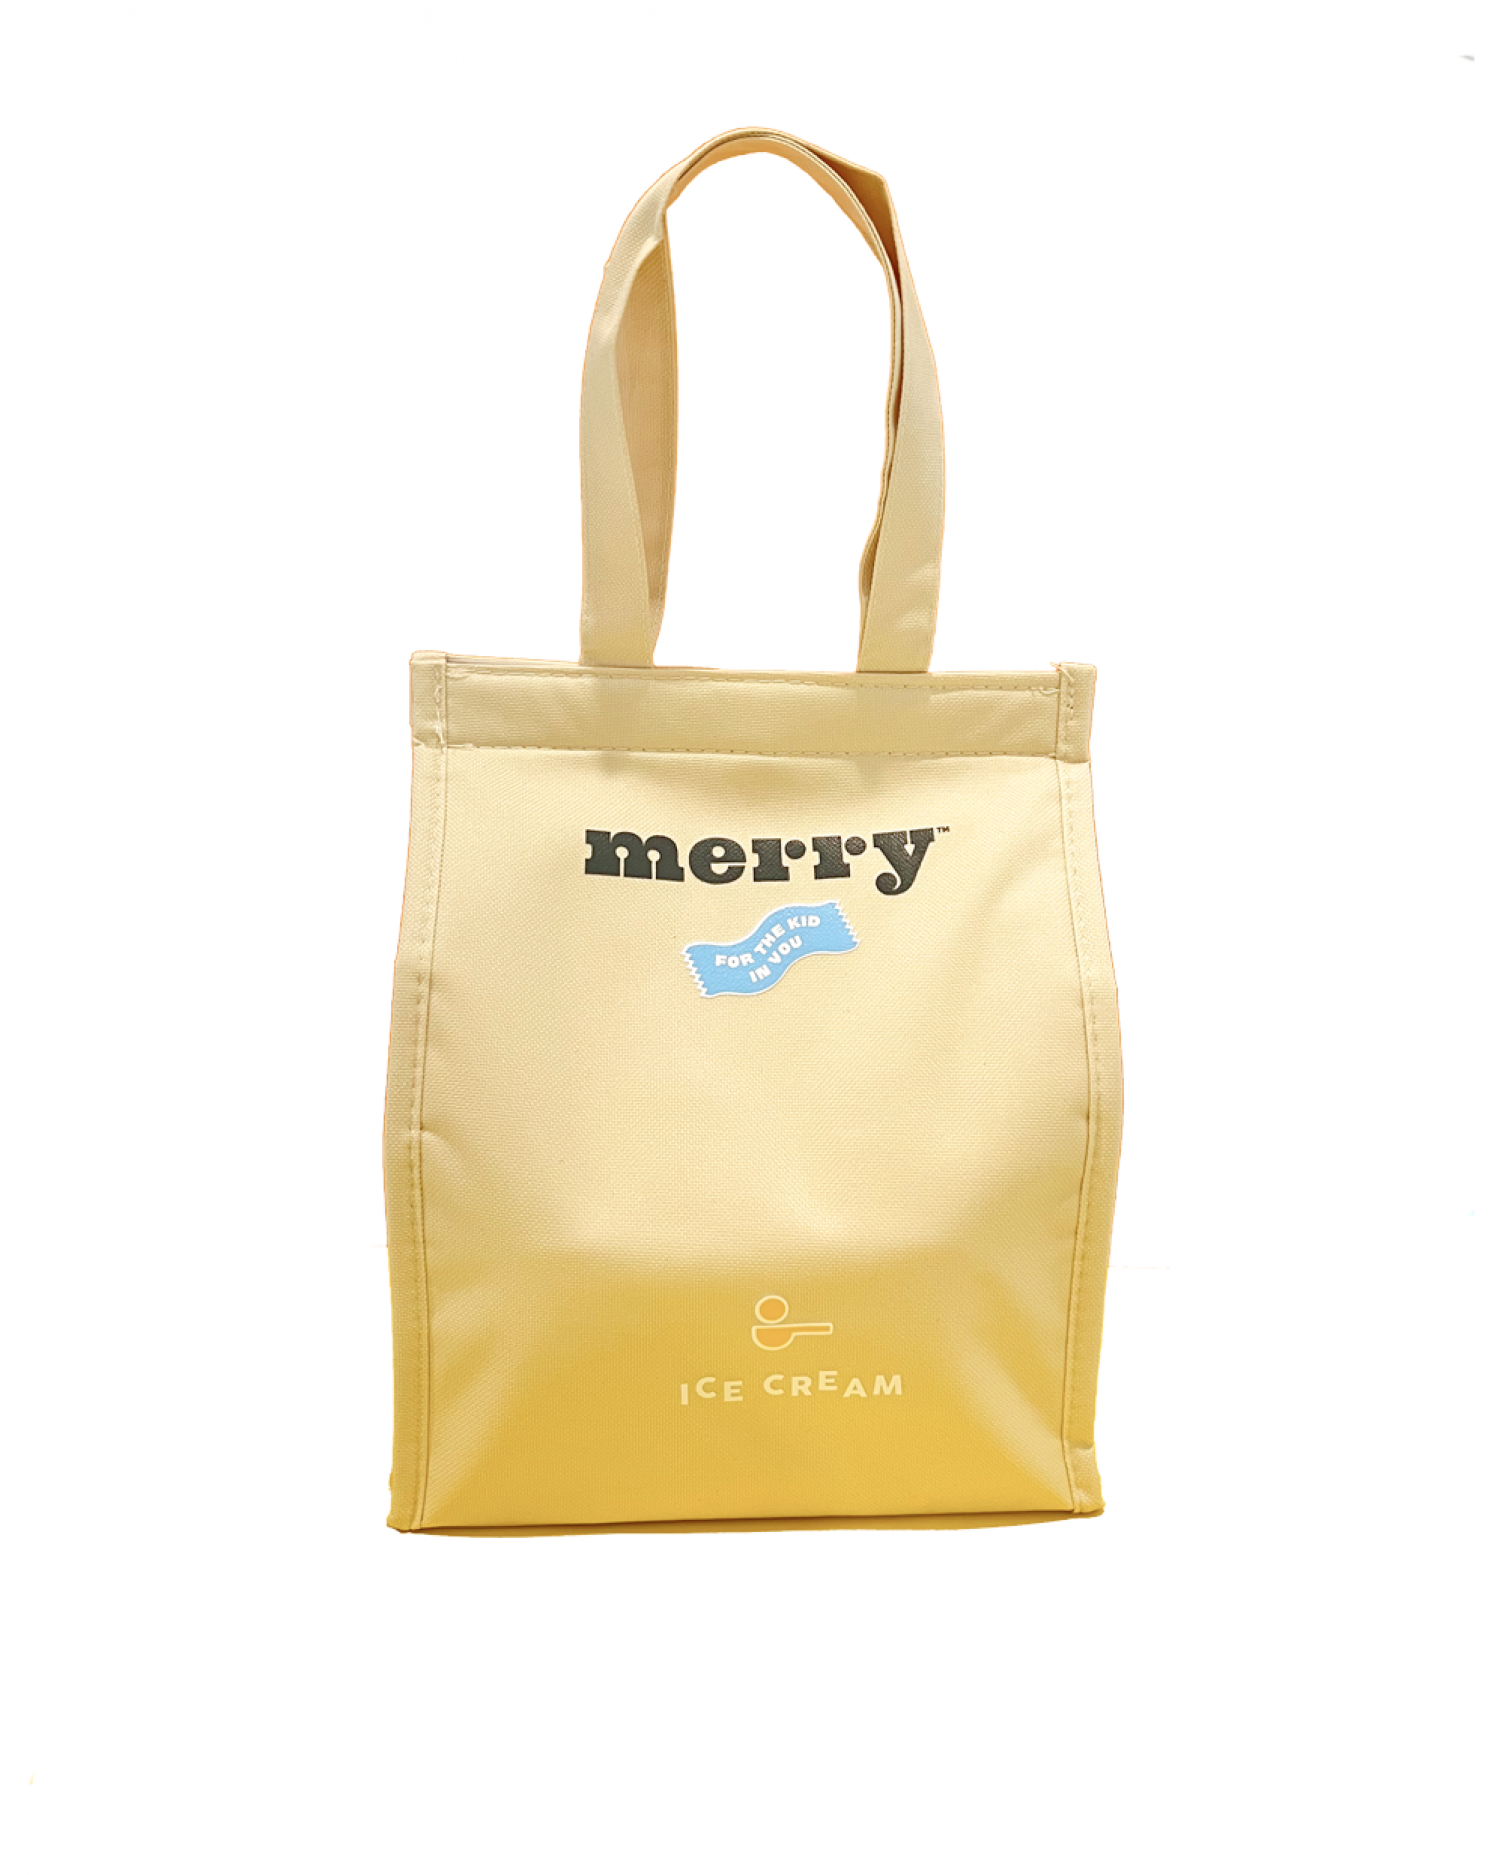 Merry's Chill Mate - Velcro Cooler Bag  Merry Me Ice Cream Caterer, Merry Me Ice Cream, Ice Cream Supplier, Ice Cream Manufacturer, Ice Cream Cart, Celebration Event, Cooperate Event, Ice Cream OEM, Penang Ice Cream, Ice Cream Bar, Malaysia ice cream